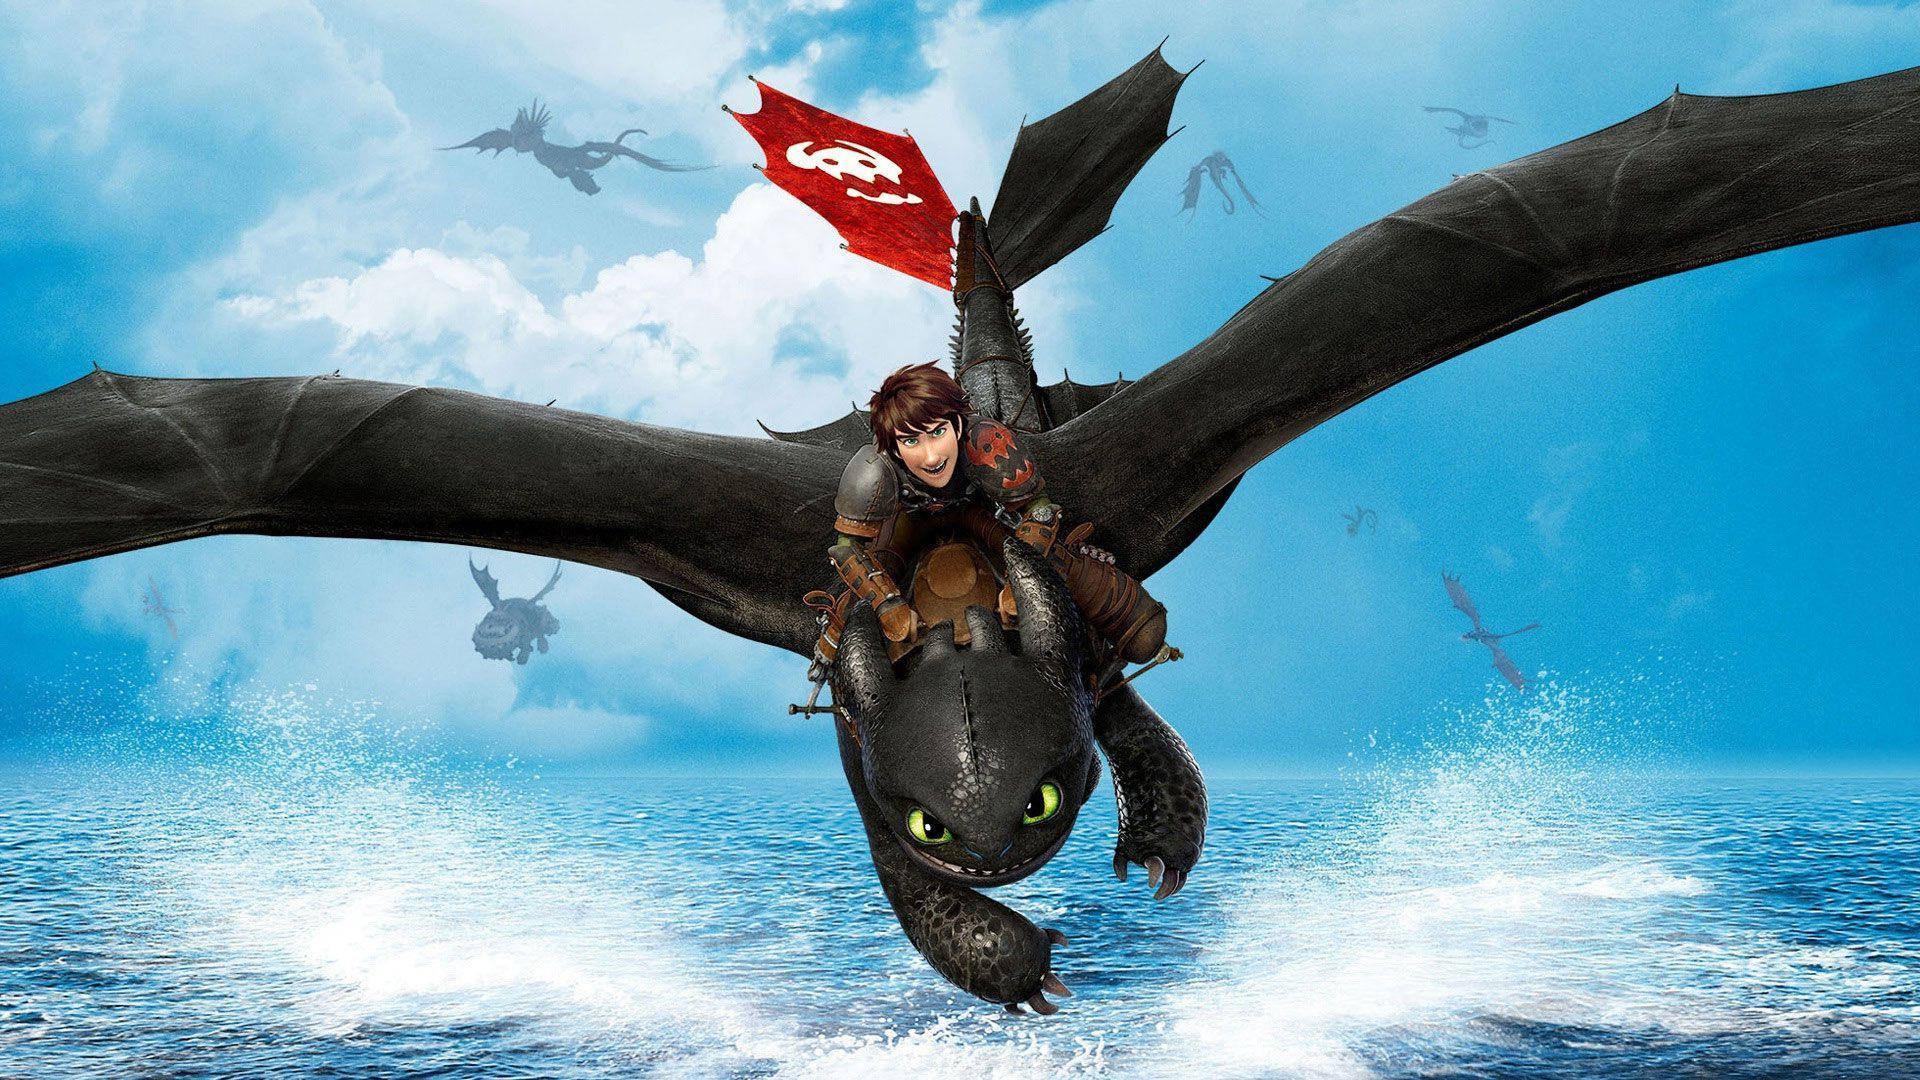 How To Train Your Dragon Hiccup Riding Toothless Background